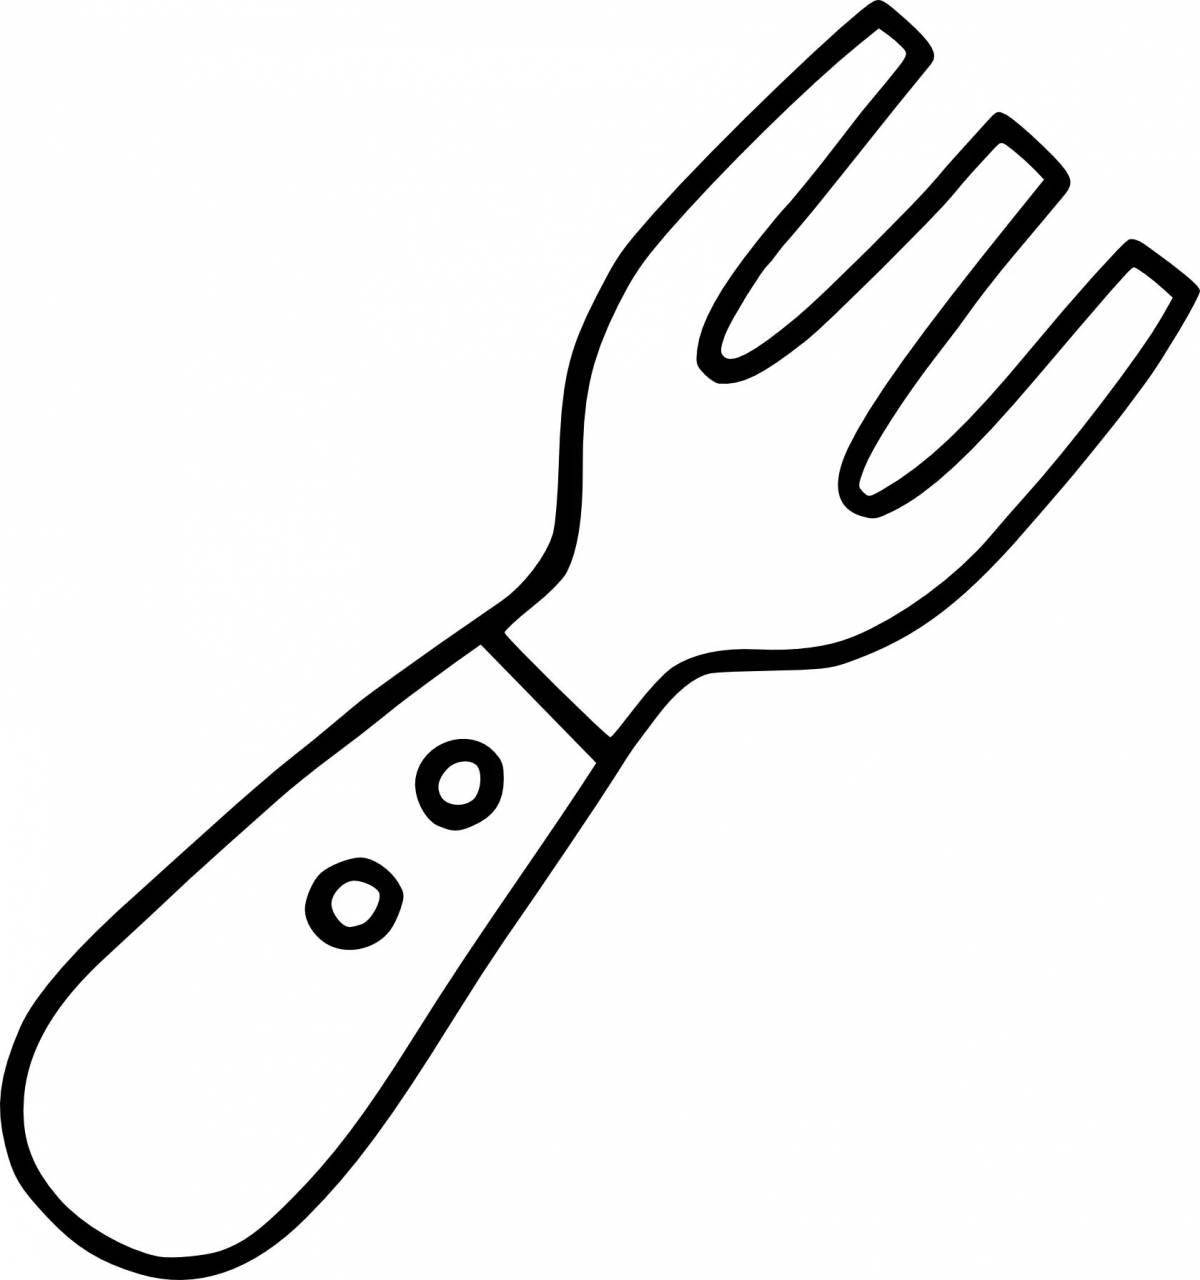 Fun fork coloring page